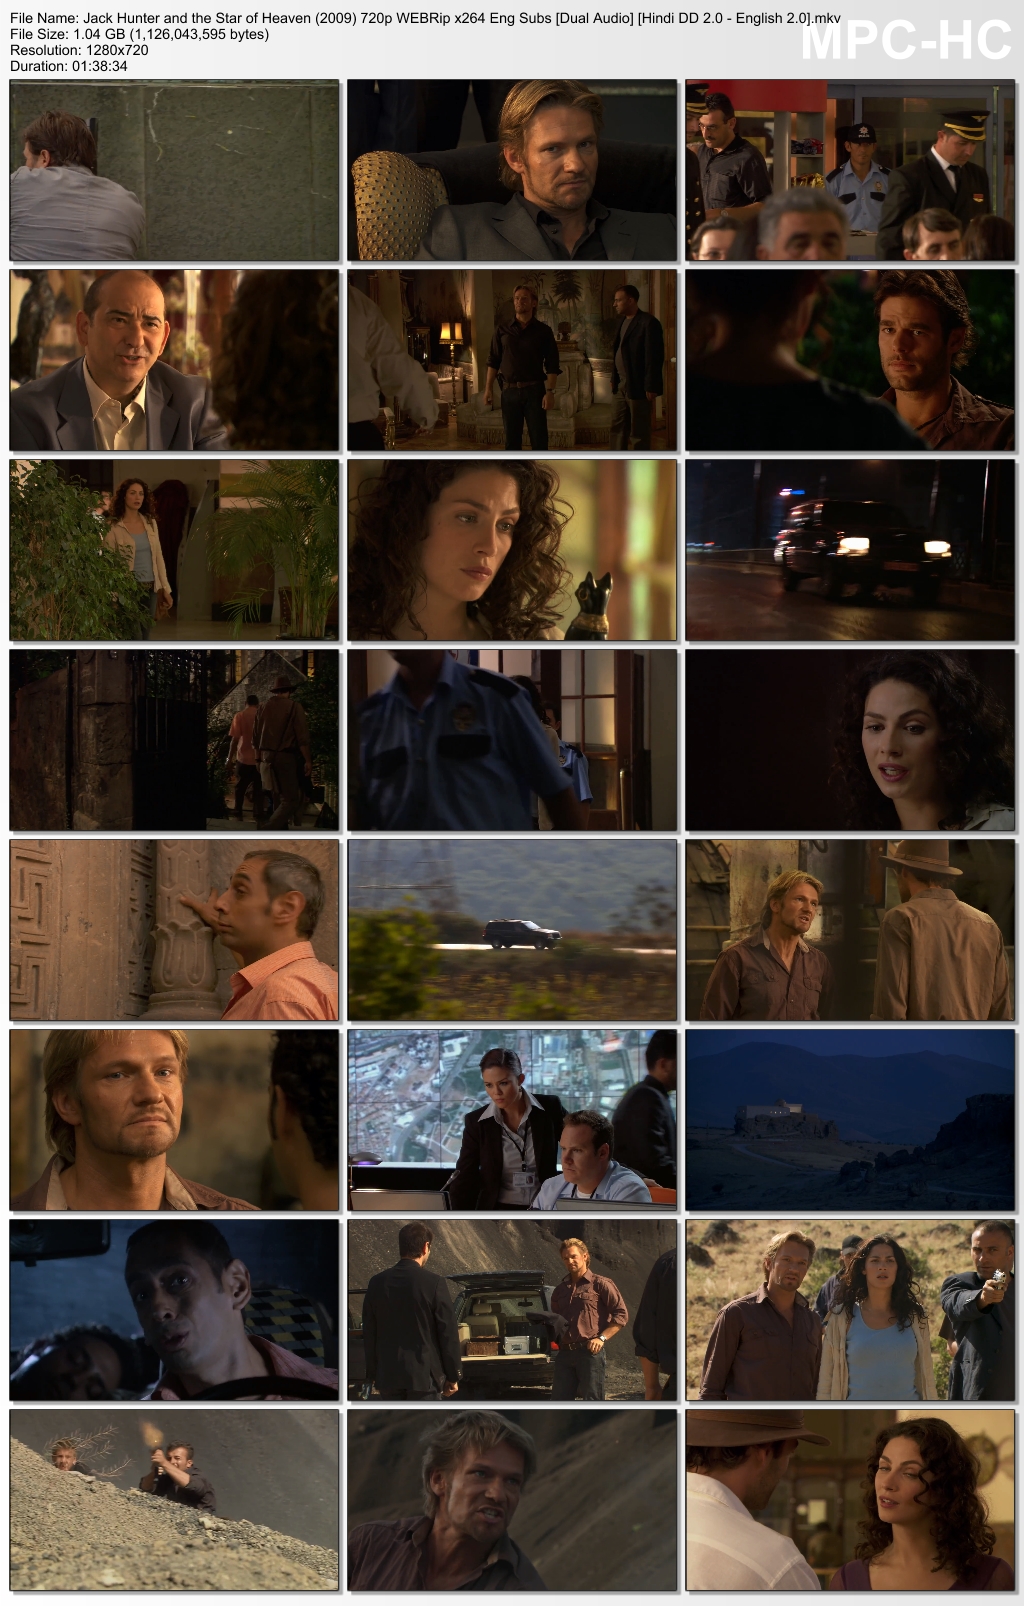 Jack Hunter and the Star of Heaven 2009 720p WEBRip Thumbs